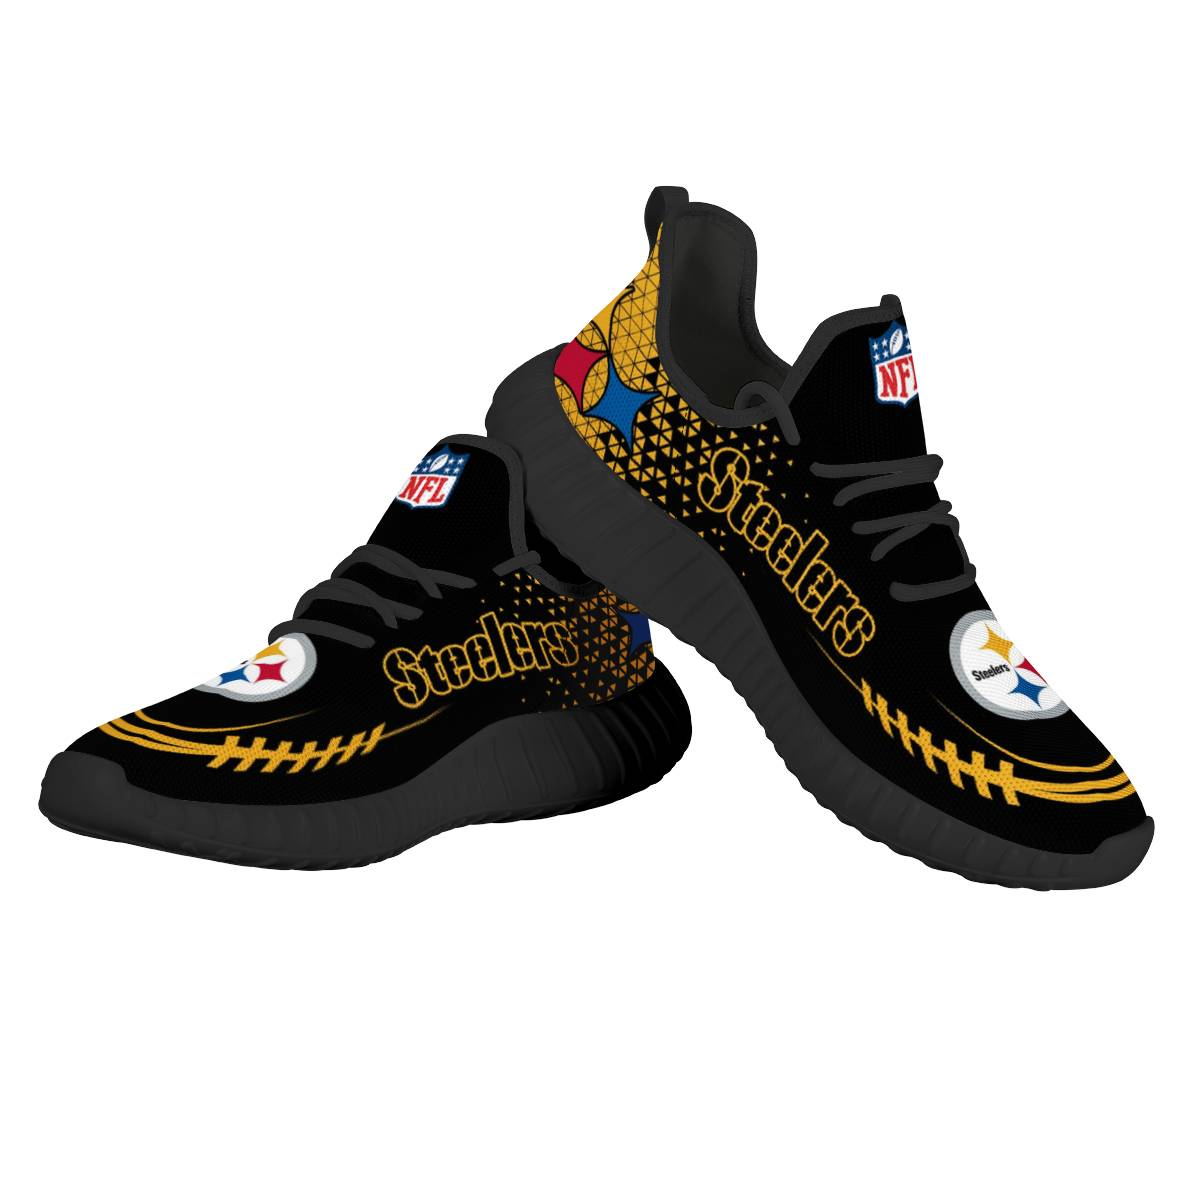 Women's NFL Pittsburgh Steelers Mesh Knit Sneakers/Shoes 012